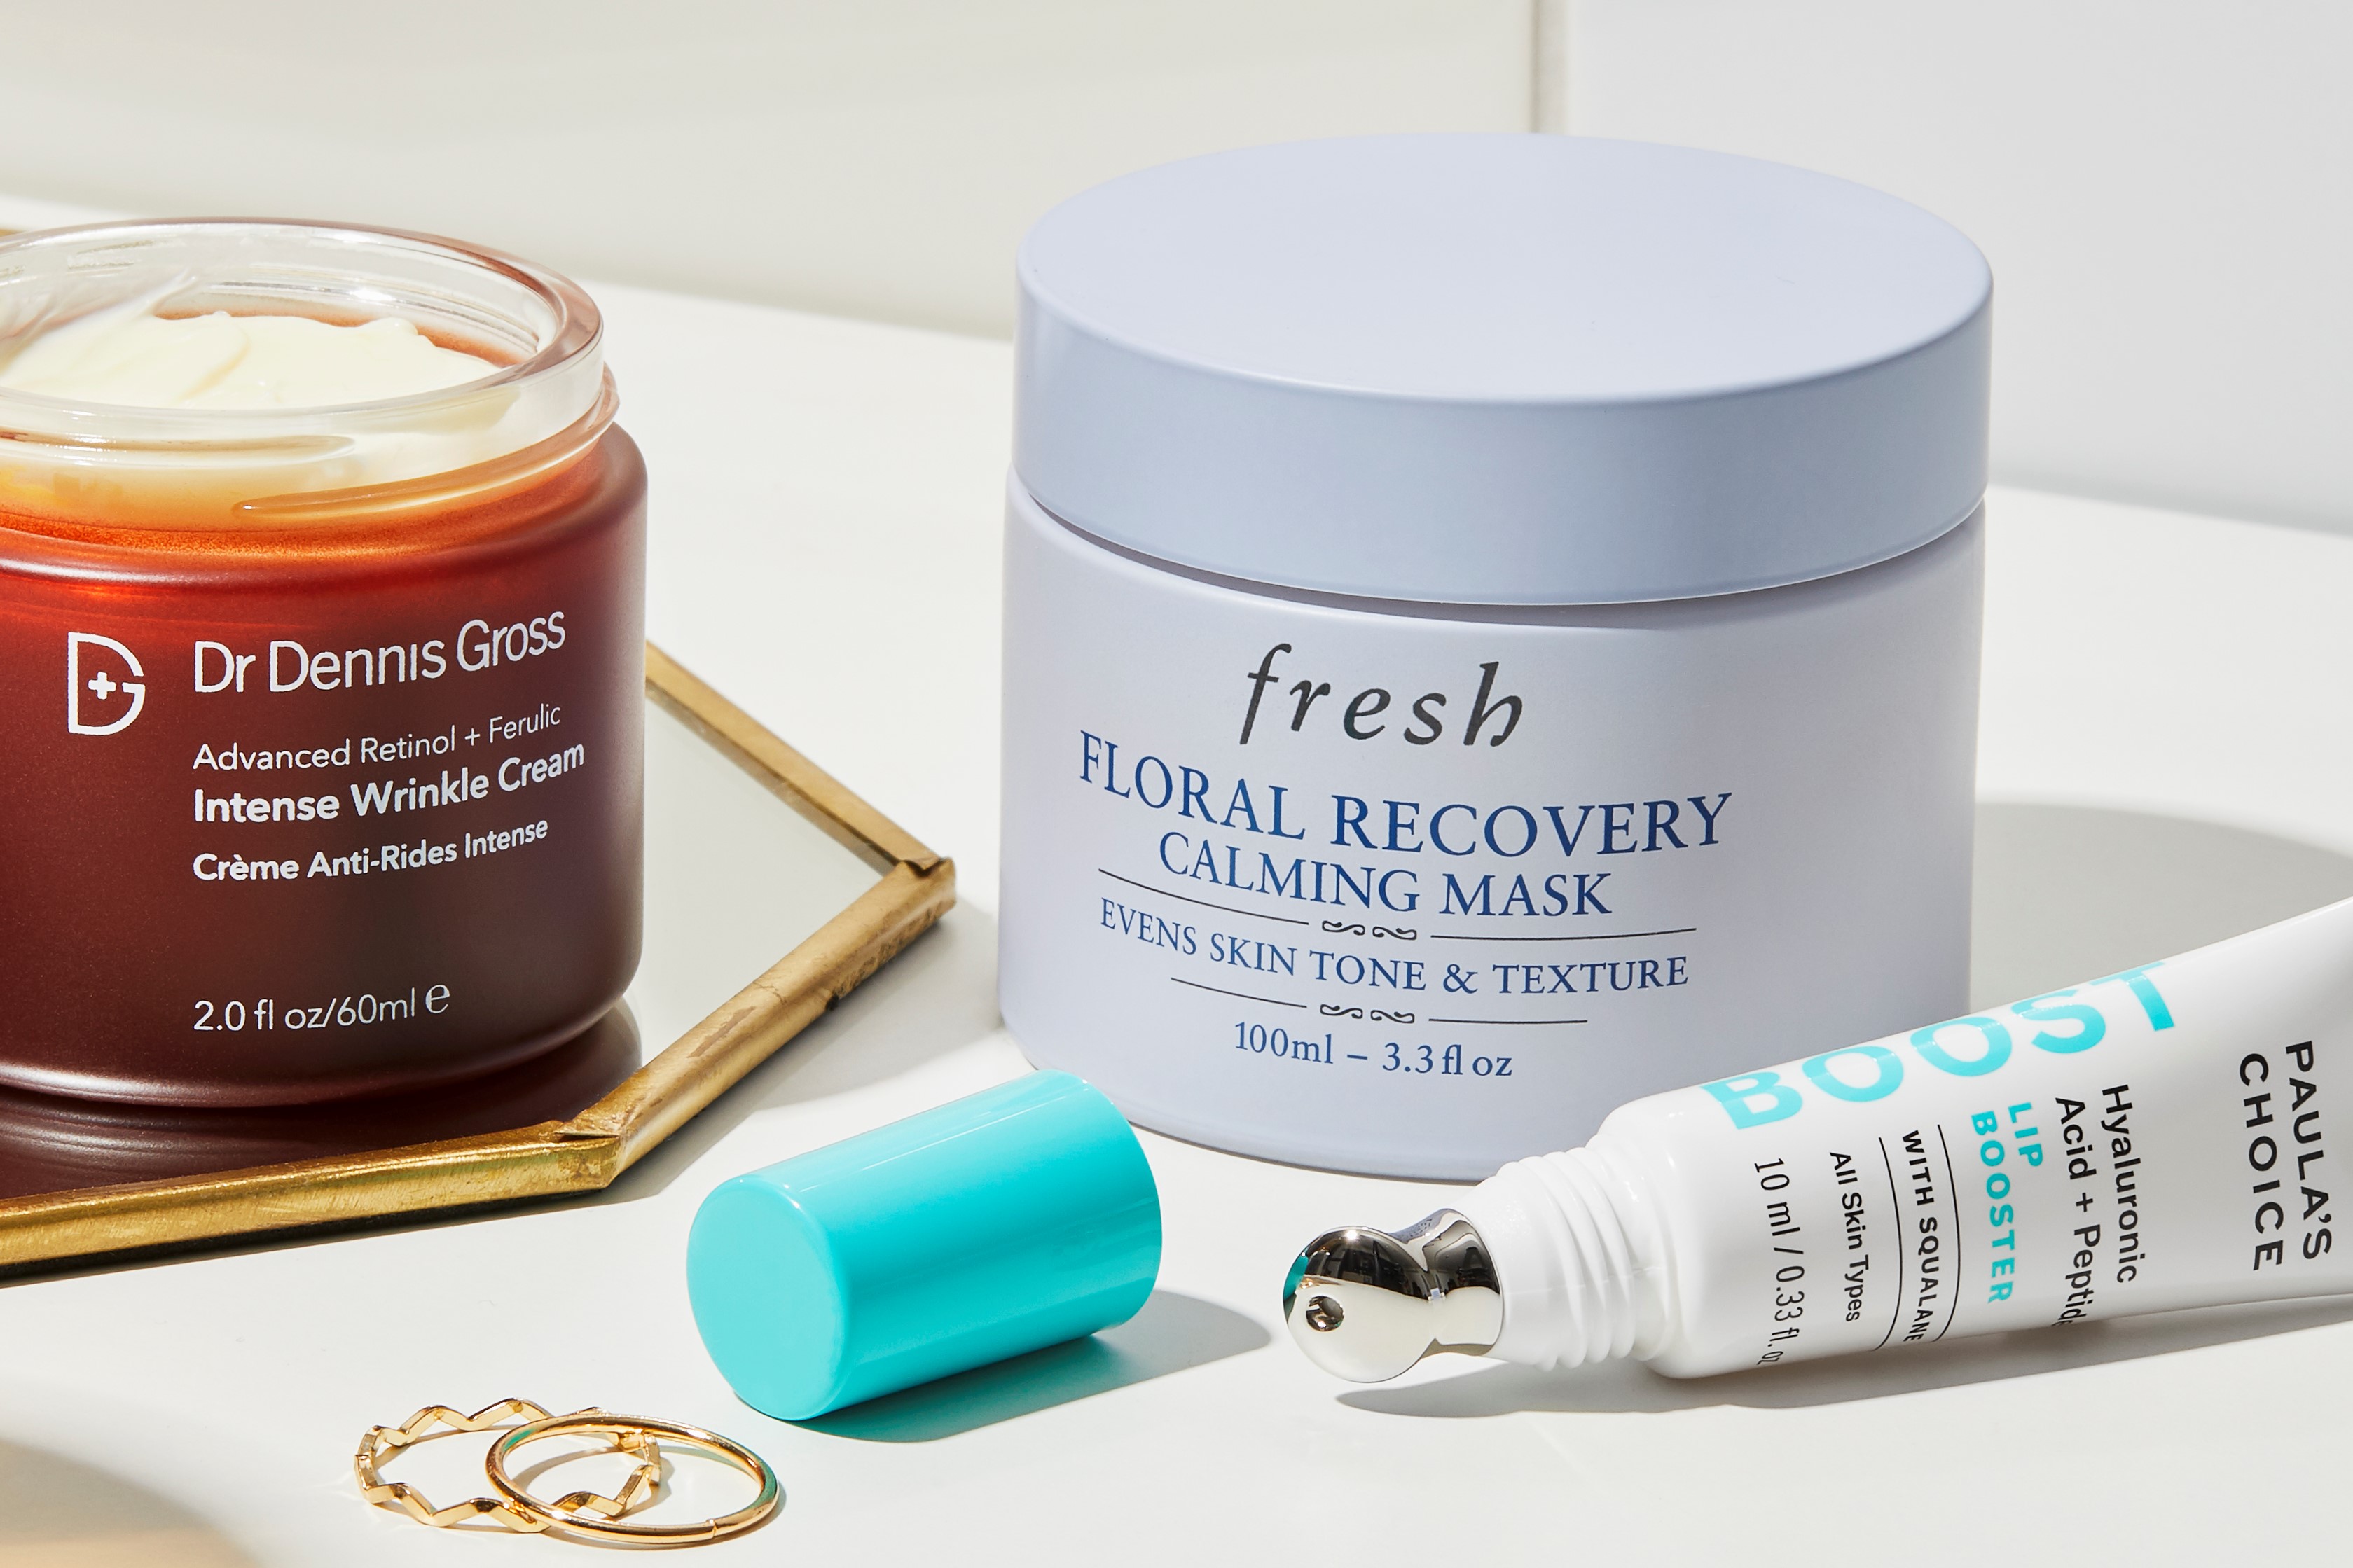 Our Winter Skincare Favourites